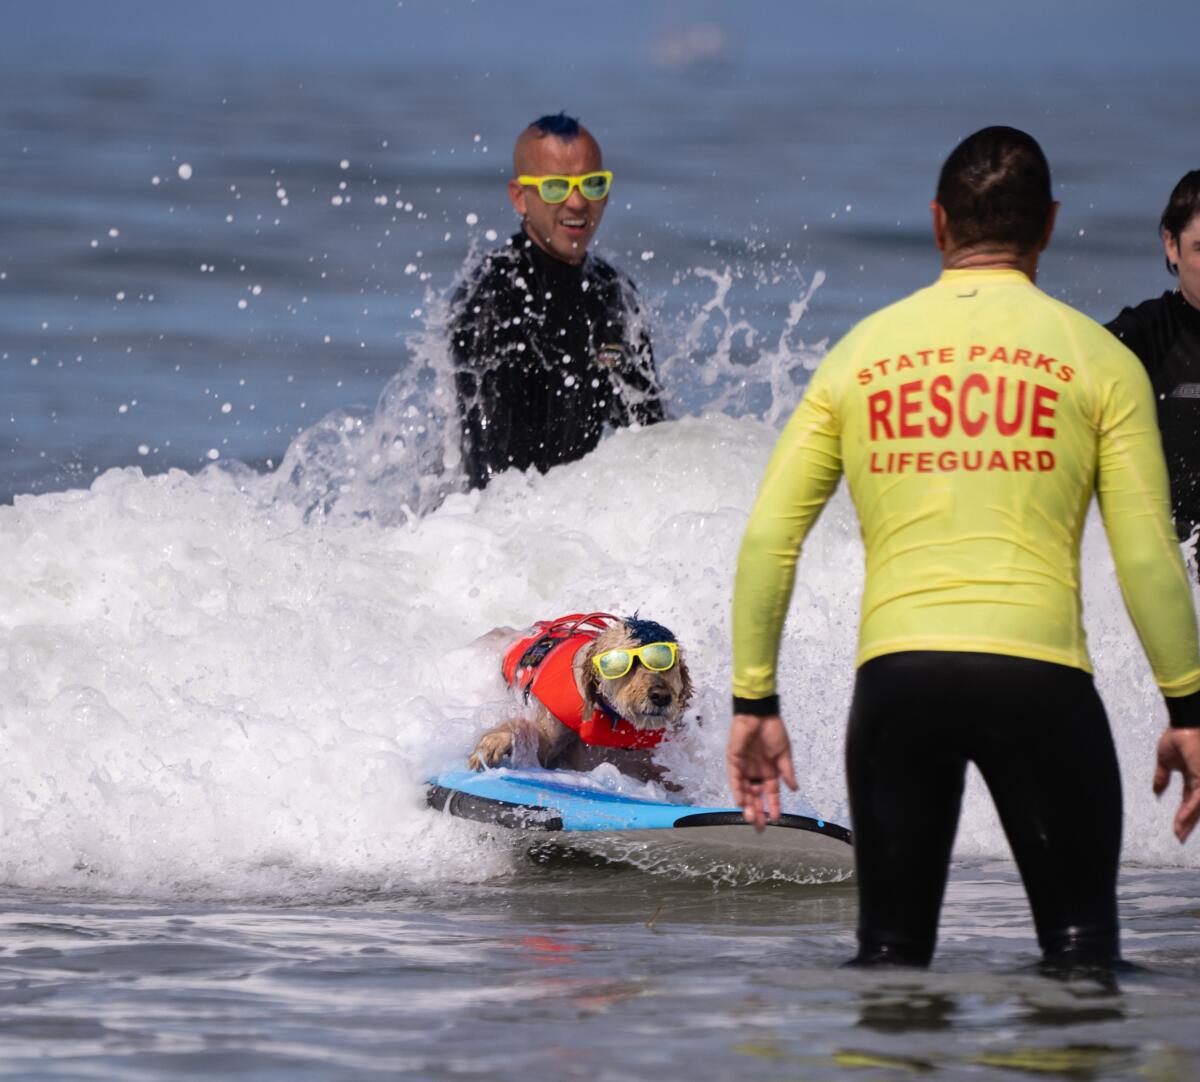 Derby, a goldendoodle from San Diego, rides a wave Friday as trainer Kioni "Kentucky" Gallahue looks on.